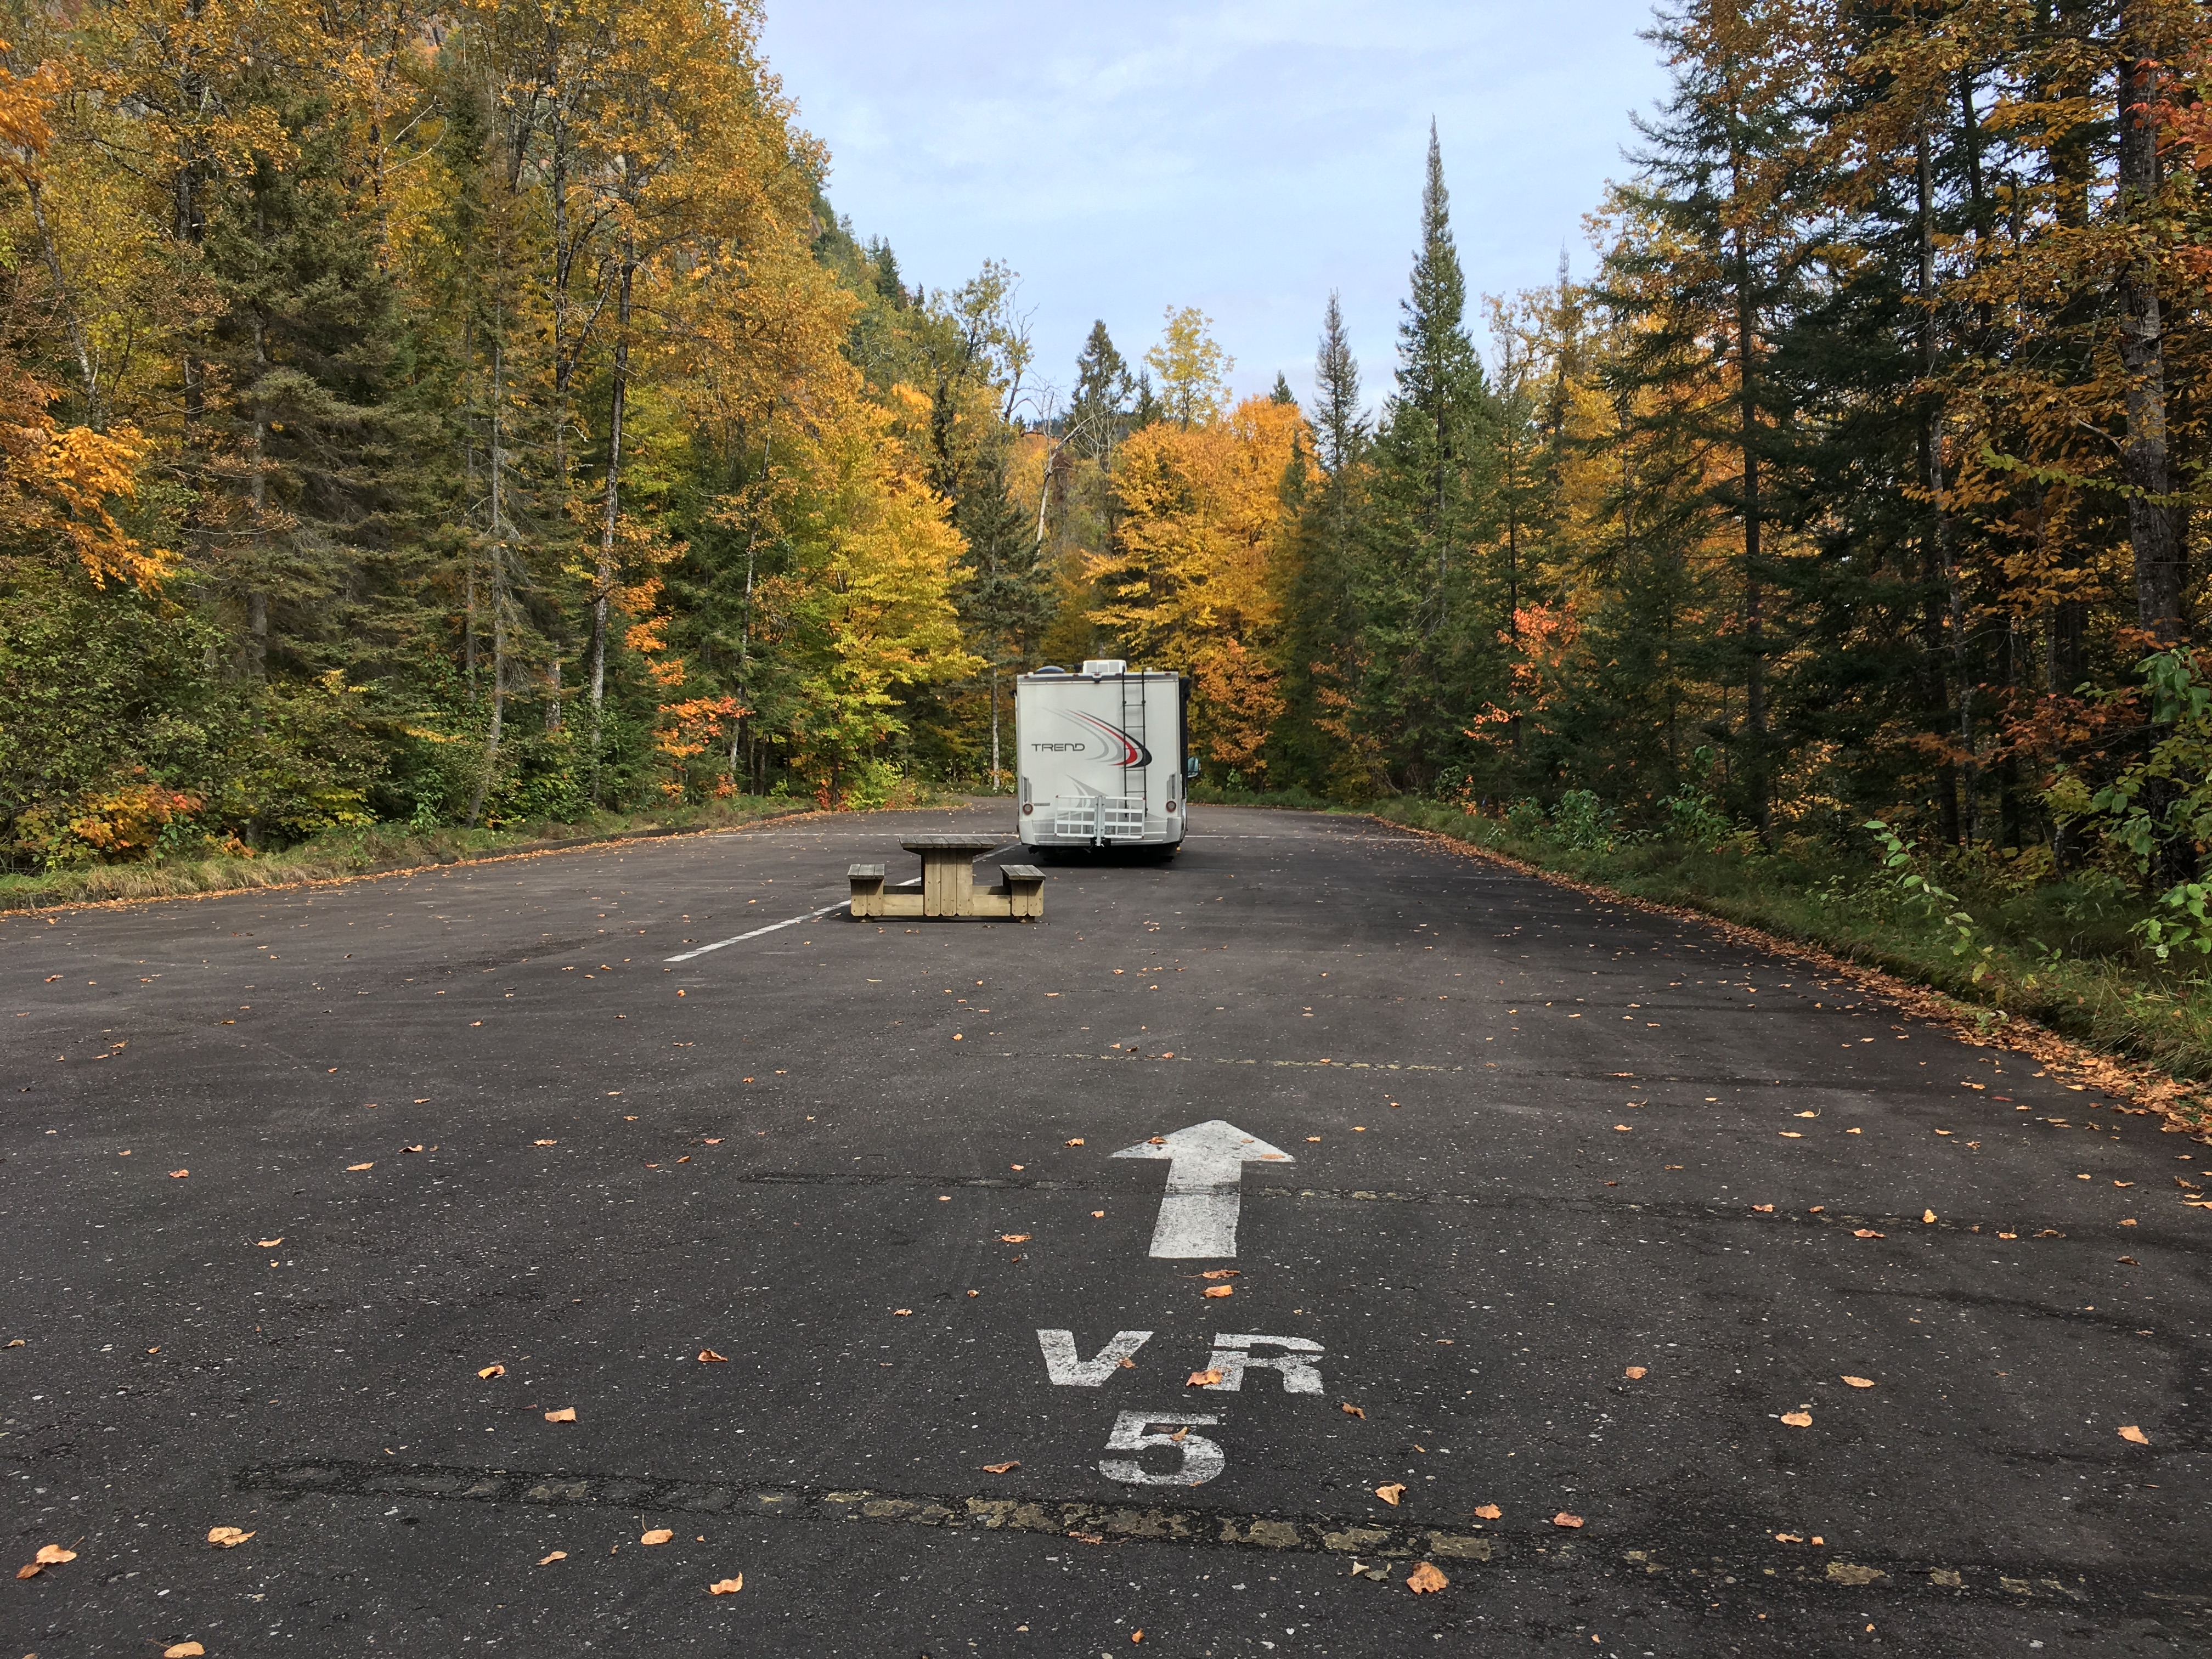 This campsite in one of Quebec's national parks is in a developed campground, but has no hook-ups, so you're boondocking.